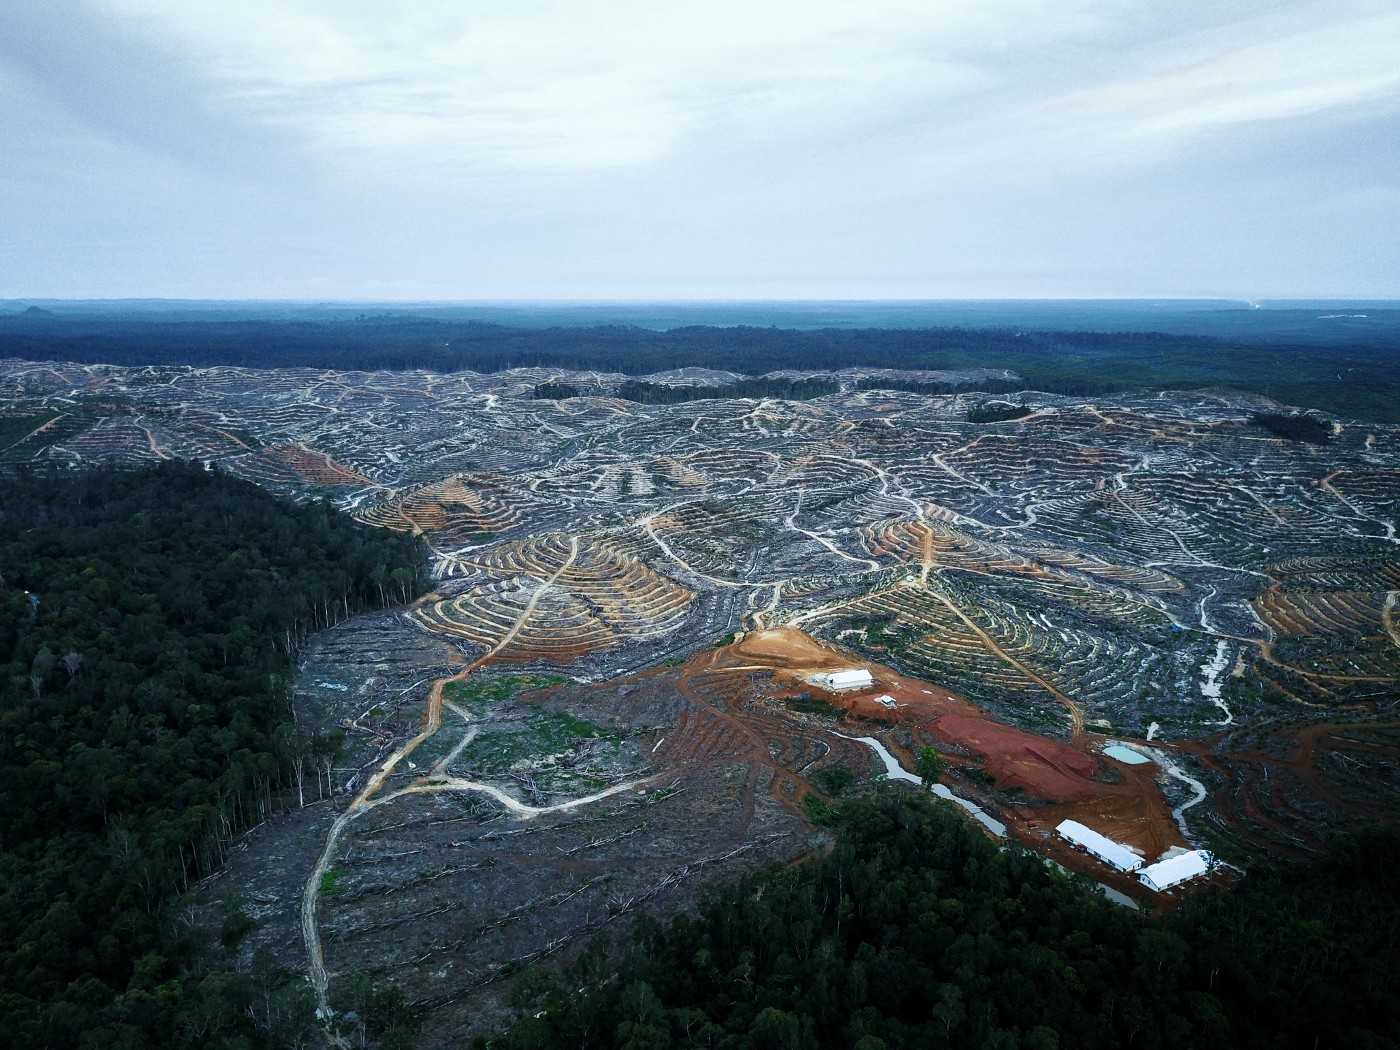 Deforestation in Gunung Mas district, in a concession issued to a palm oil company by a corrupt politician